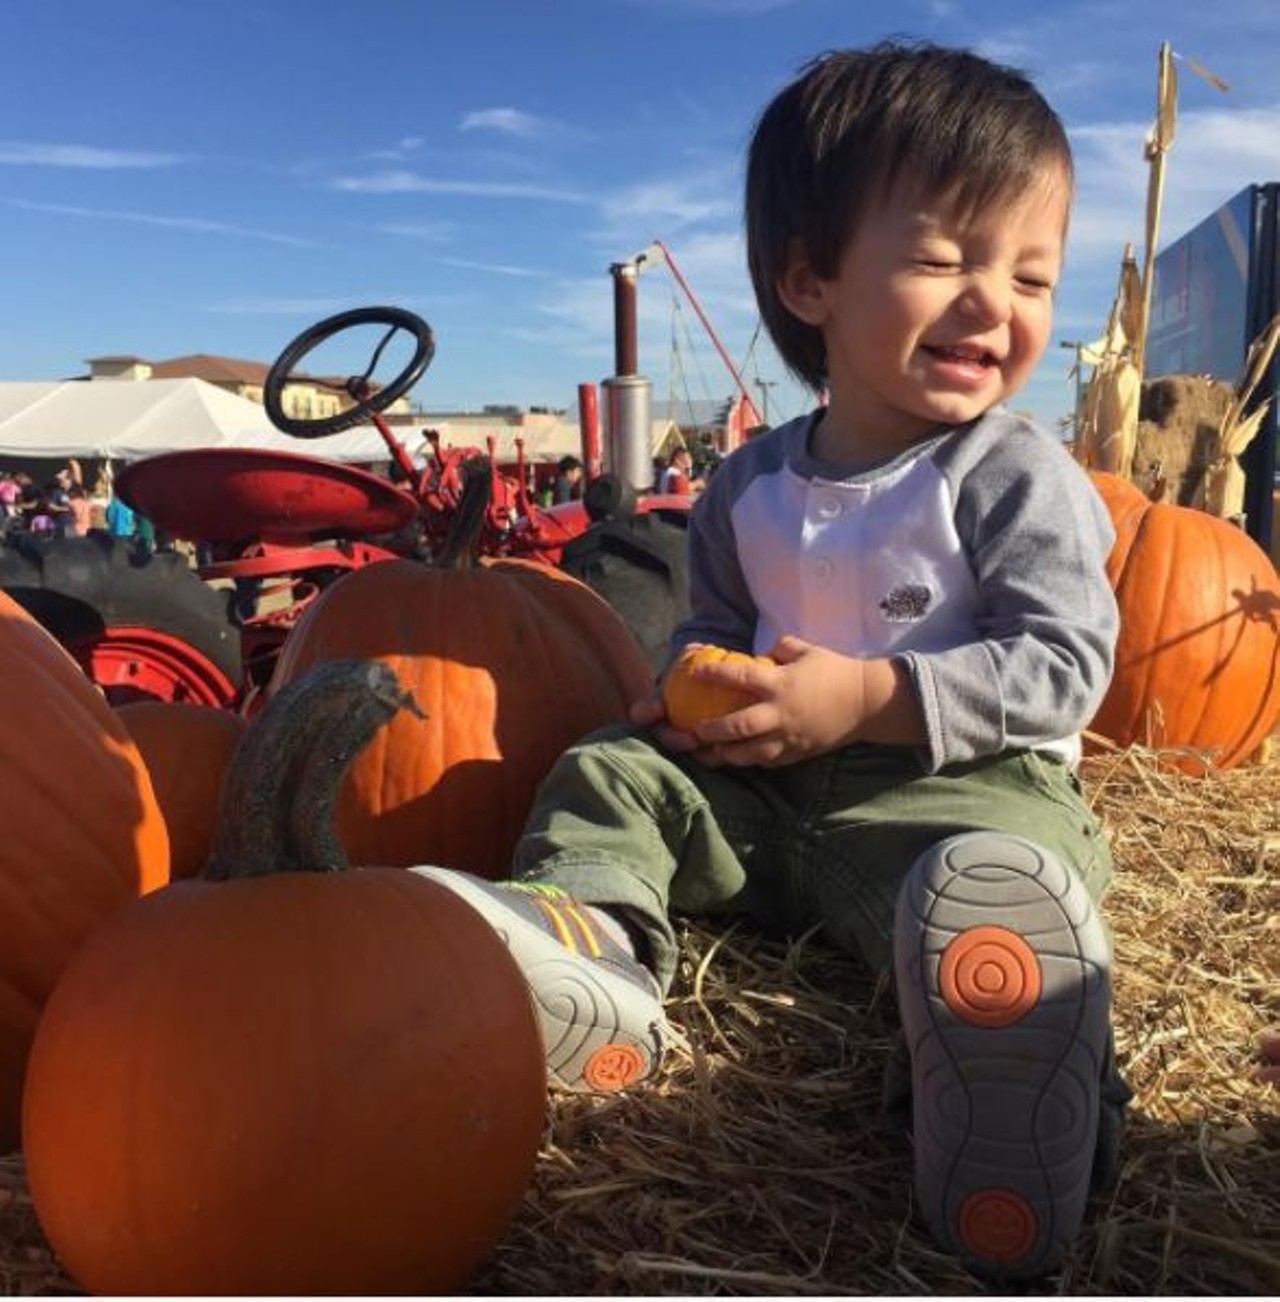 The Pumpkin Patch San Antonio
8739 State Highway Texas 151, facebook.com
Bring the family to enjoy this pumpkin patch - even your pupper! Leashed and well-behaved dogs are welcome at this pumpkin patch located near SeaWorld. Open weekends from September 30 through October 29.
Photo via Instagram, lauravgarcia1